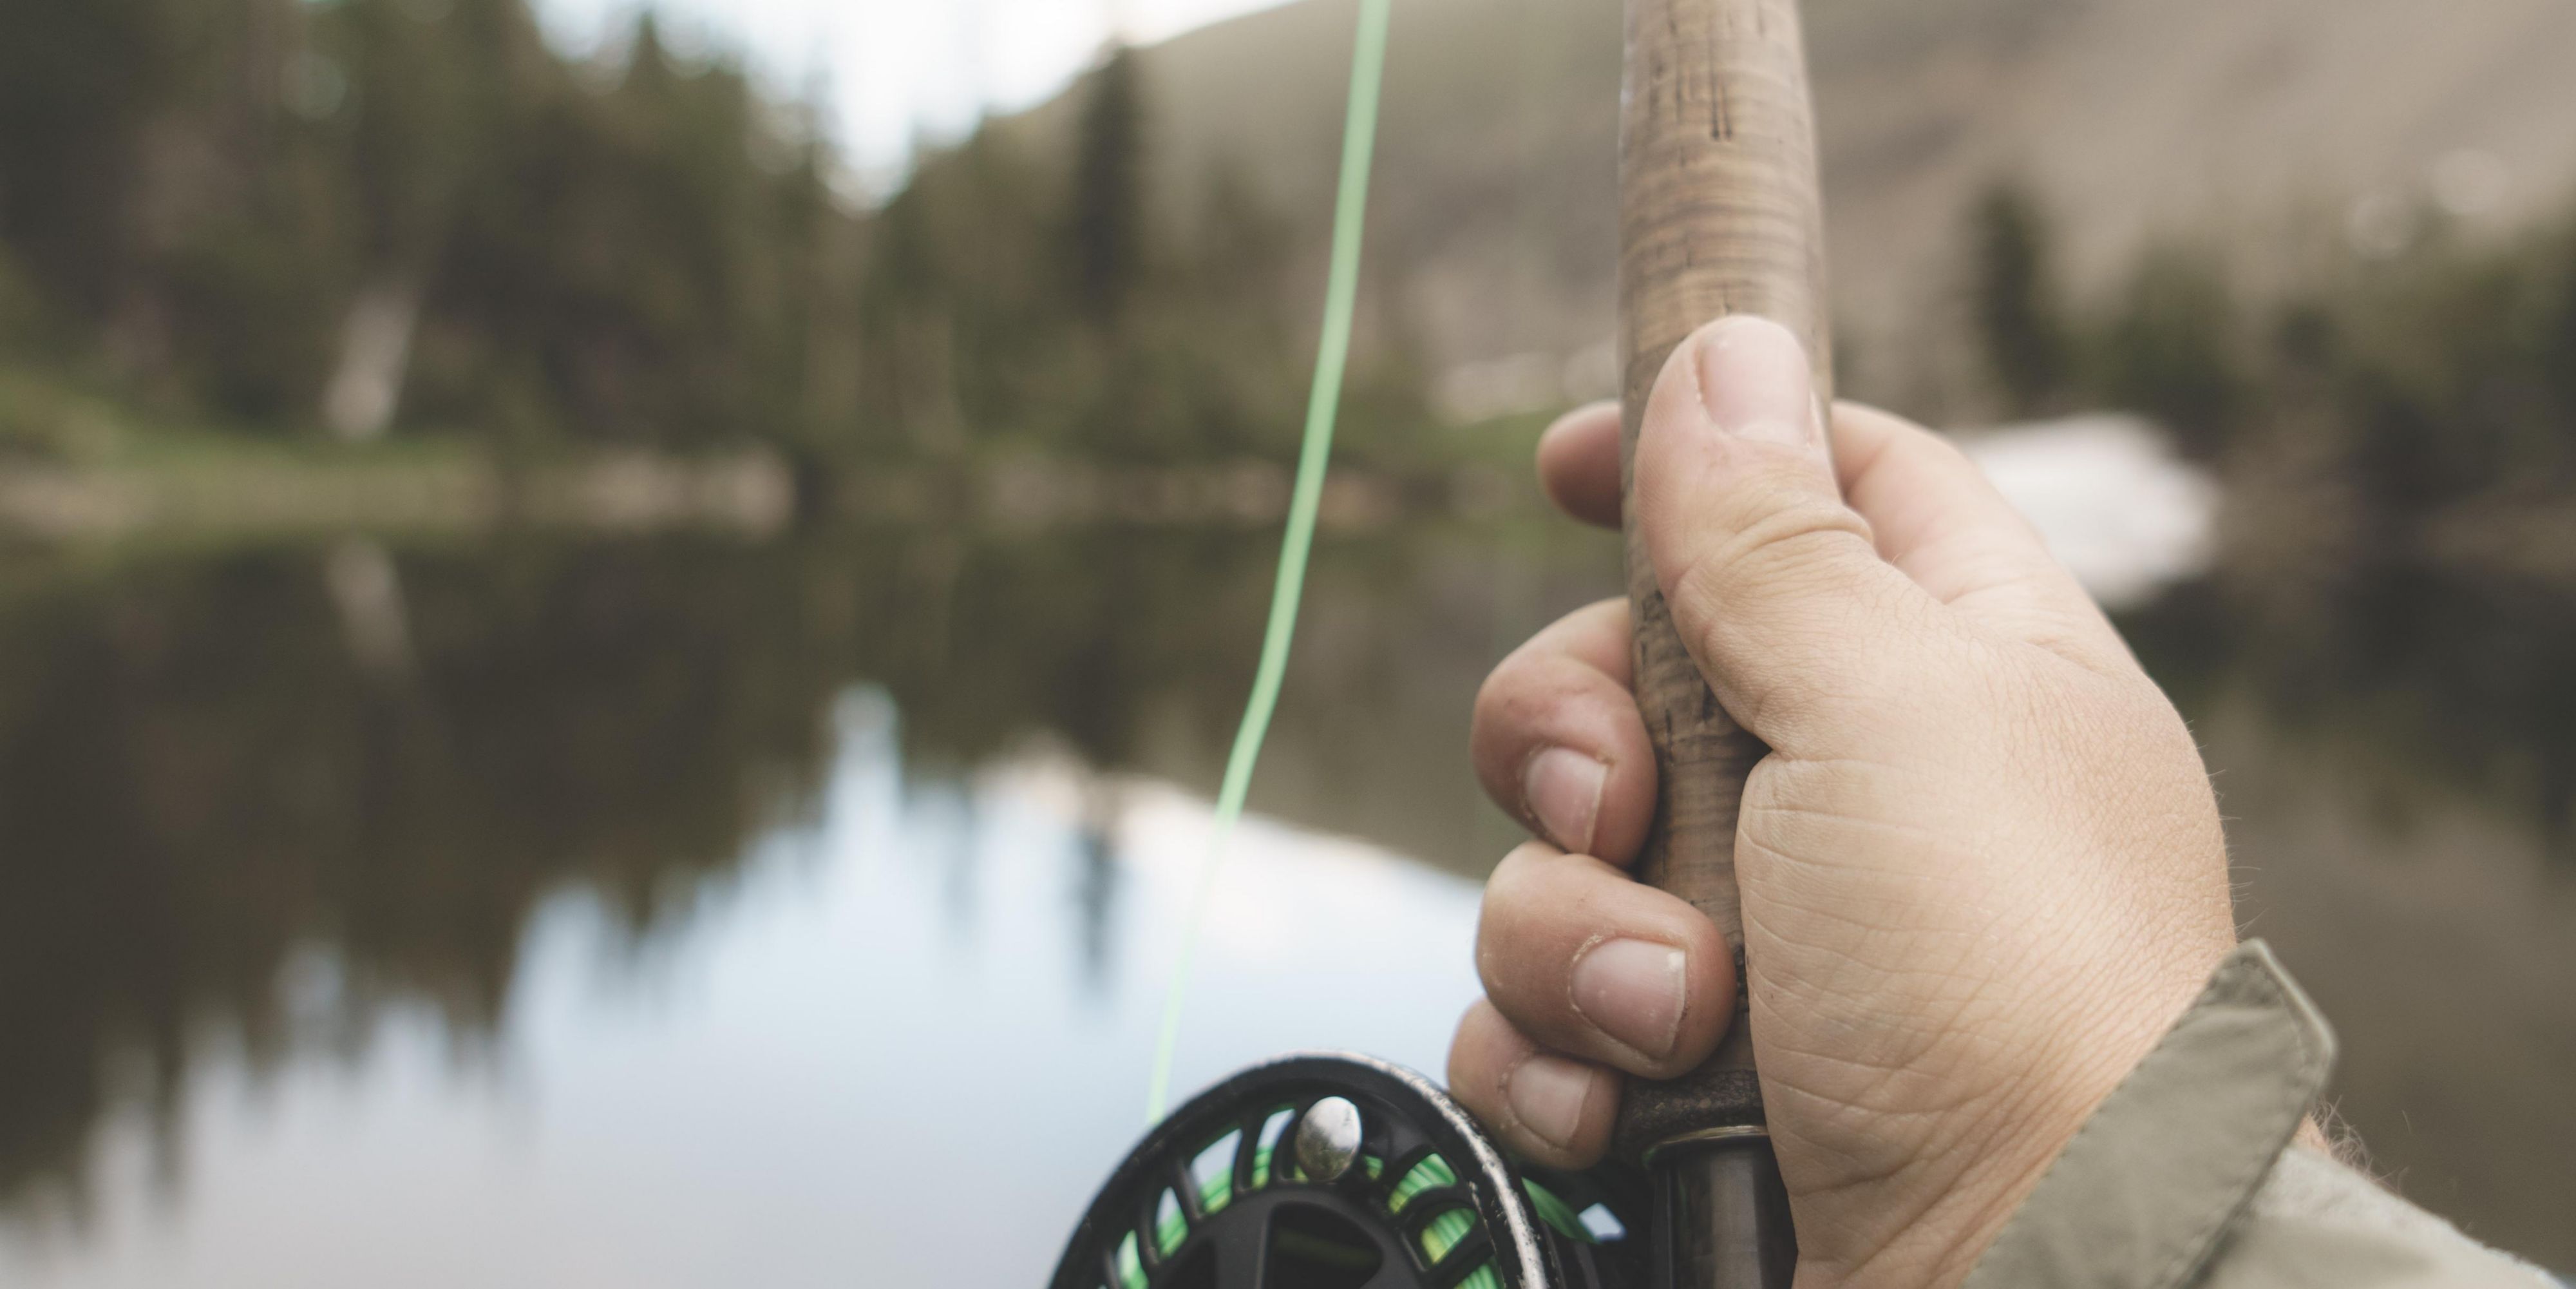 Fly Fishing and Lake Fishing at Blue Mesa are a must do activity when you are staying in Gunnison. Top Rated Guides in the area will also take you to the best fishing holes. Learn the best techniques in Fly Fishing